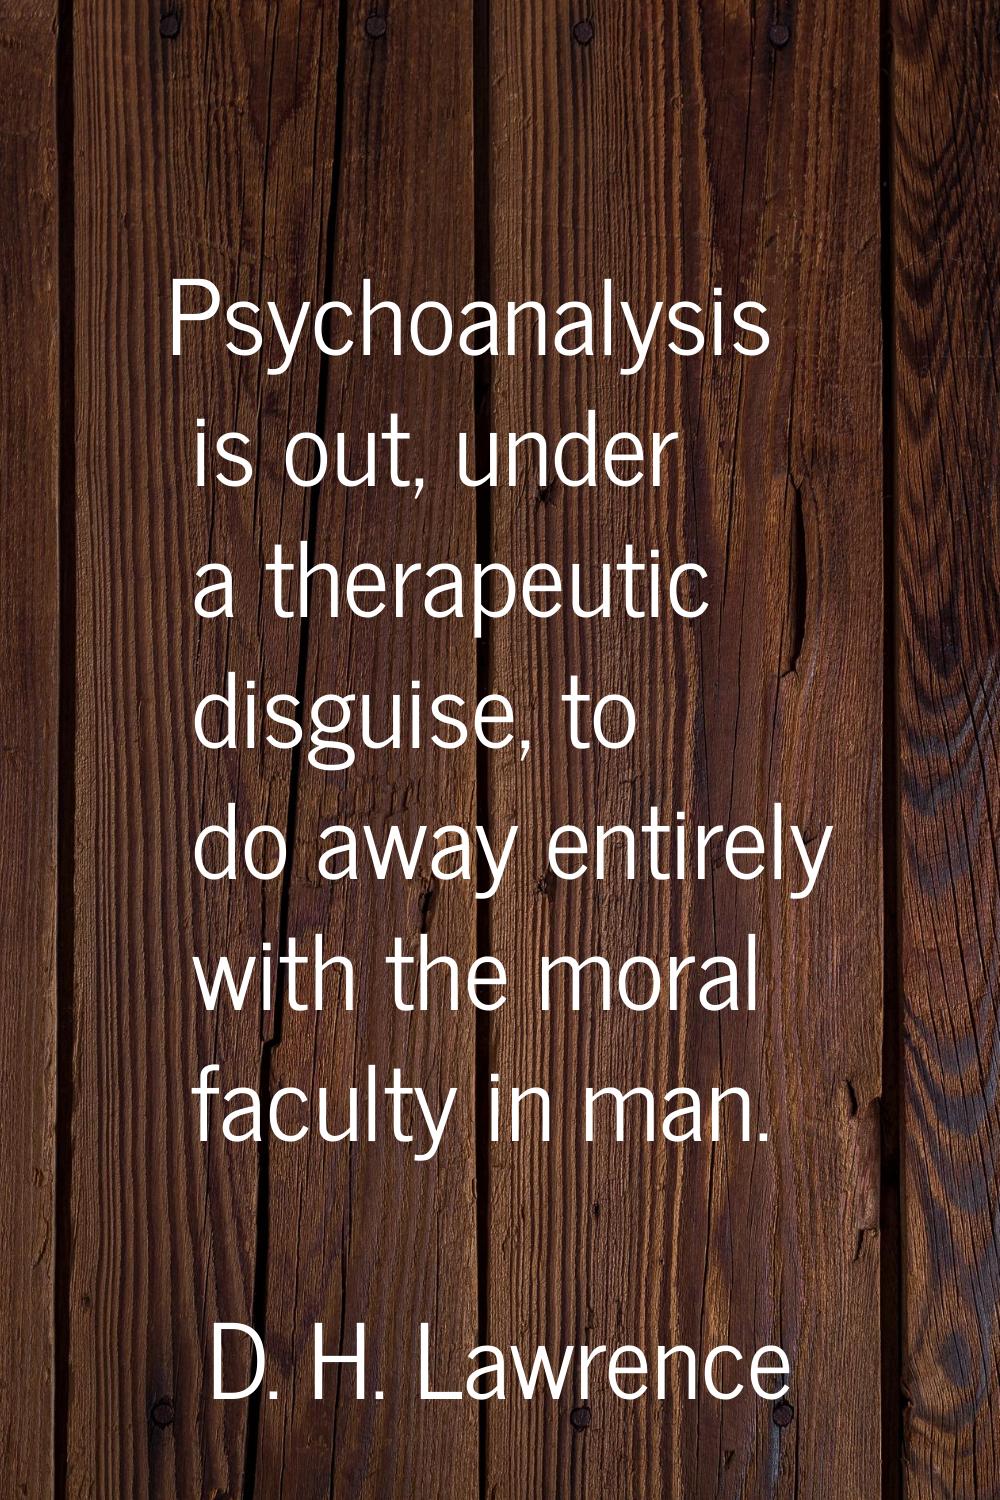 Psychoanalysis is out, under a therapeutic disguise, to do away entirely with the moral faculty in 